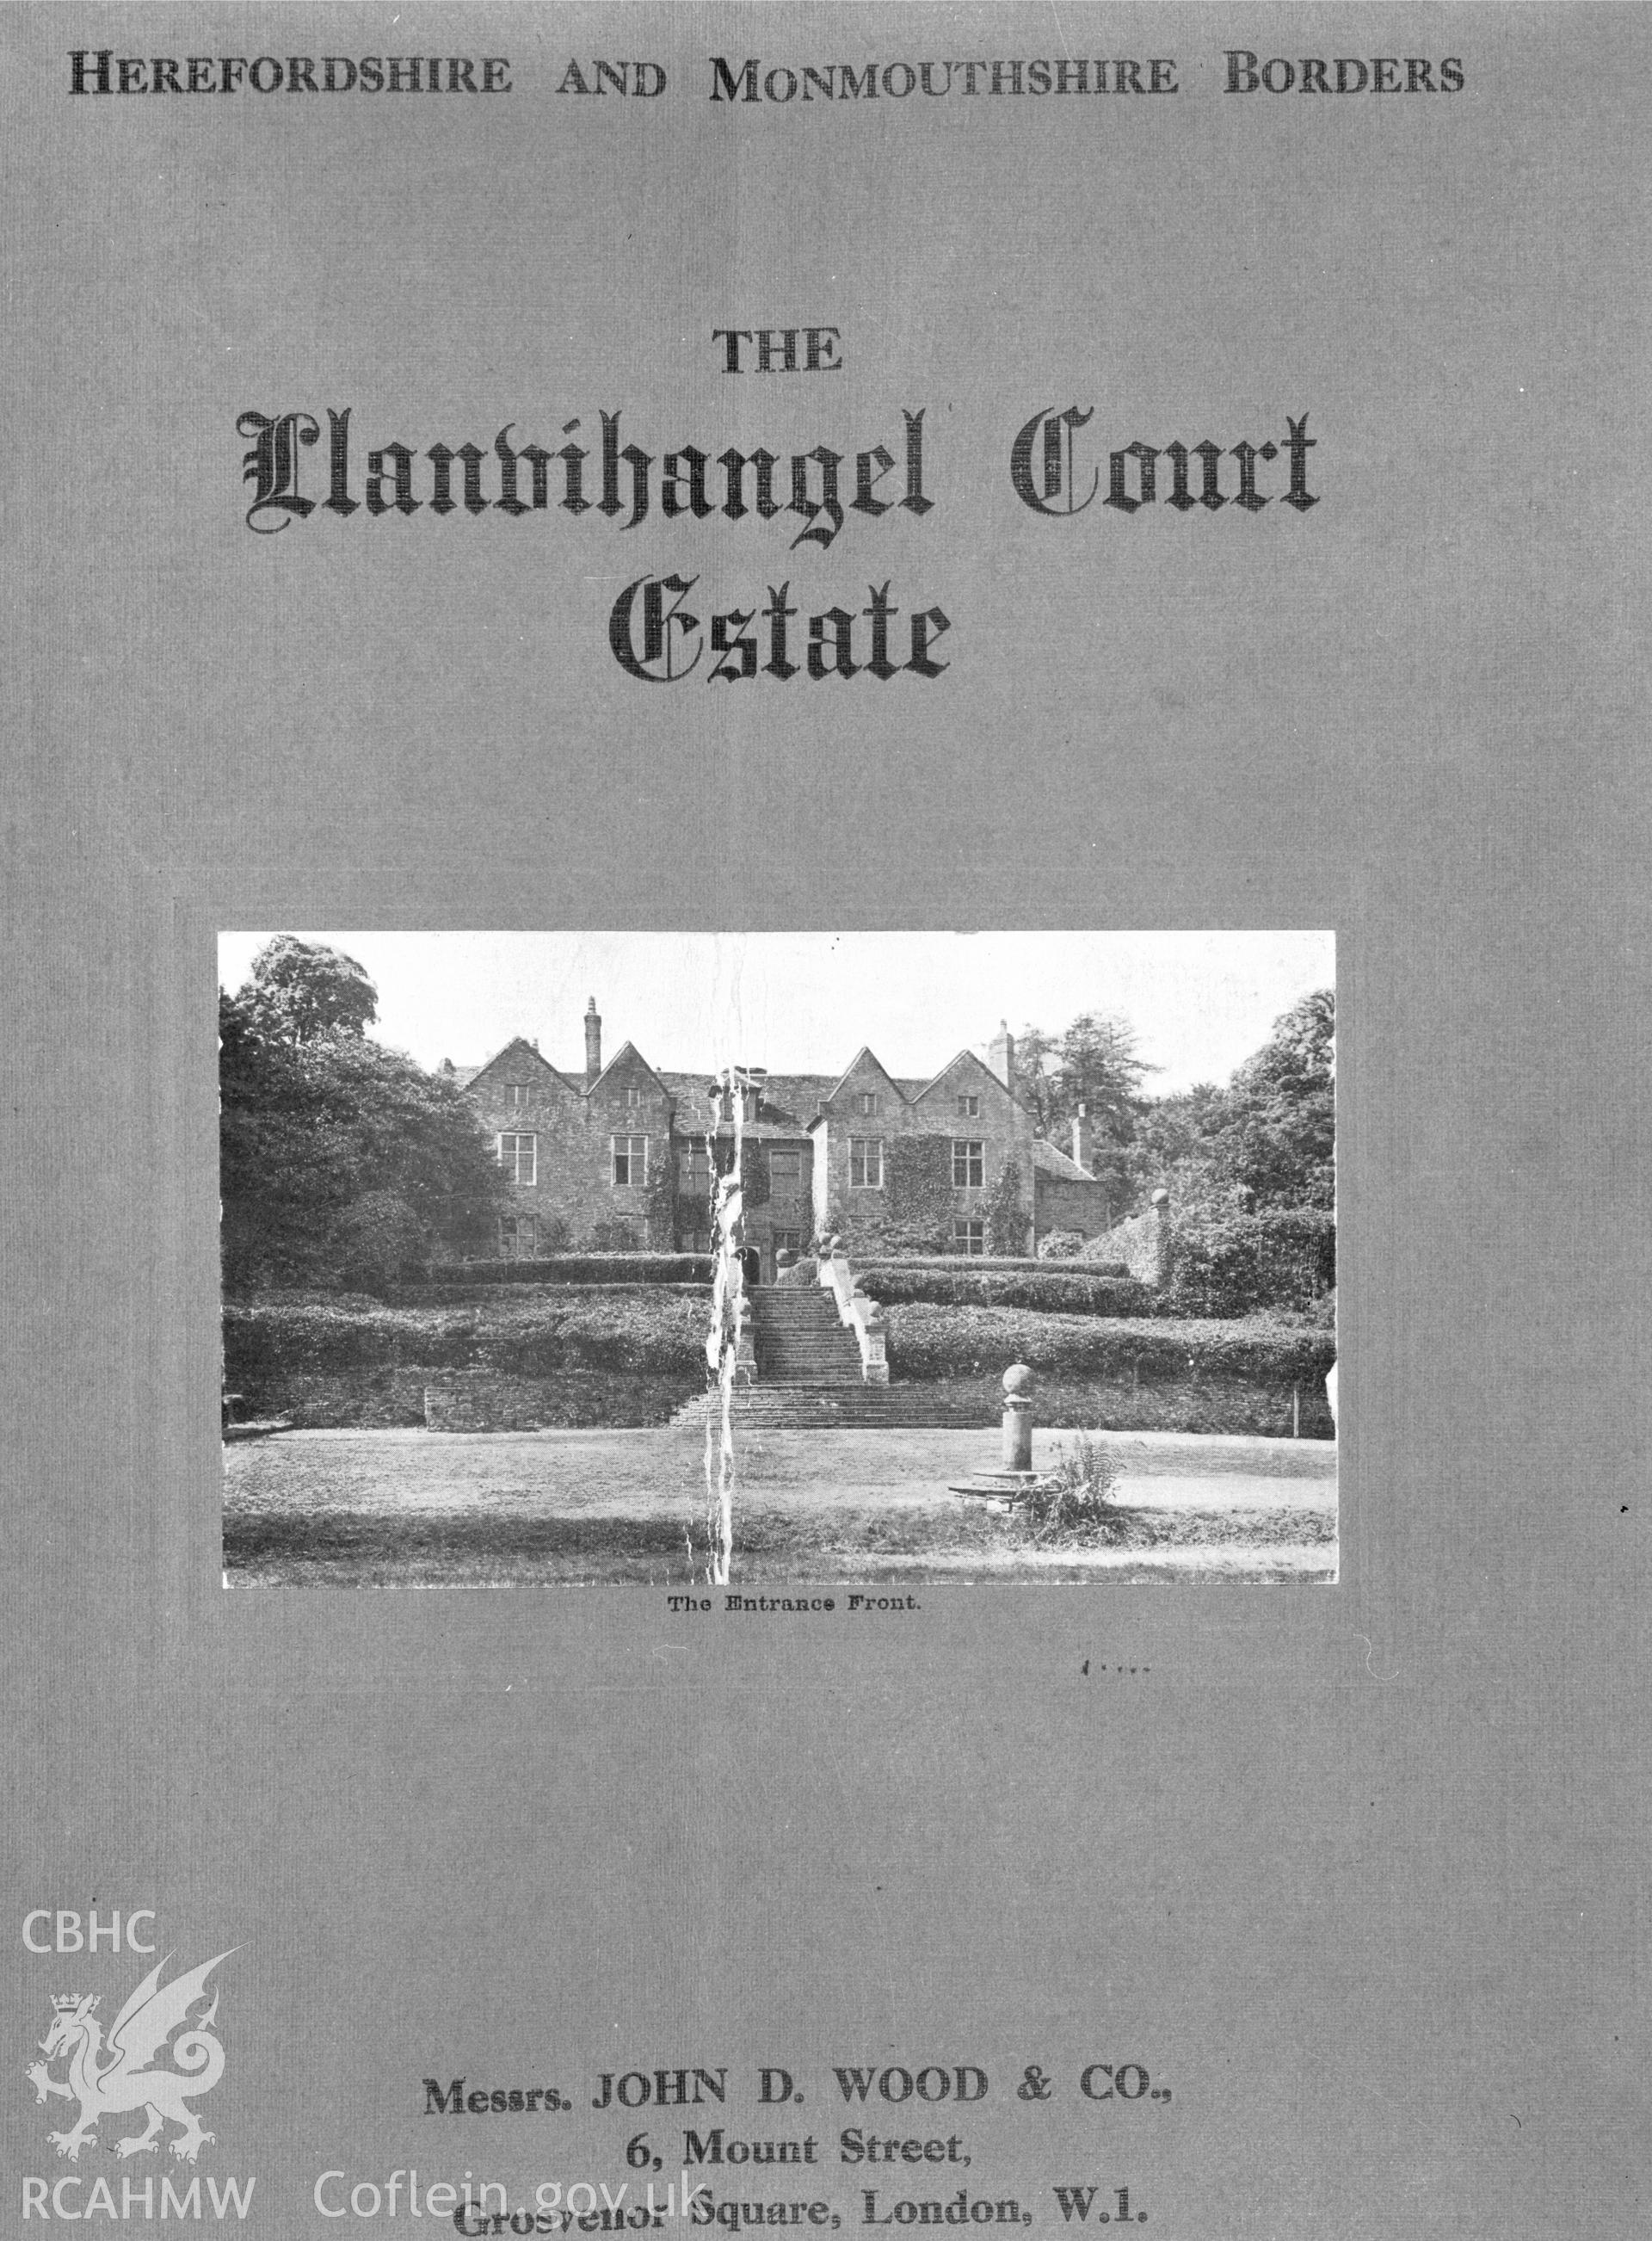 Black and white acetate negative showing a page from undated estate sales particulars.